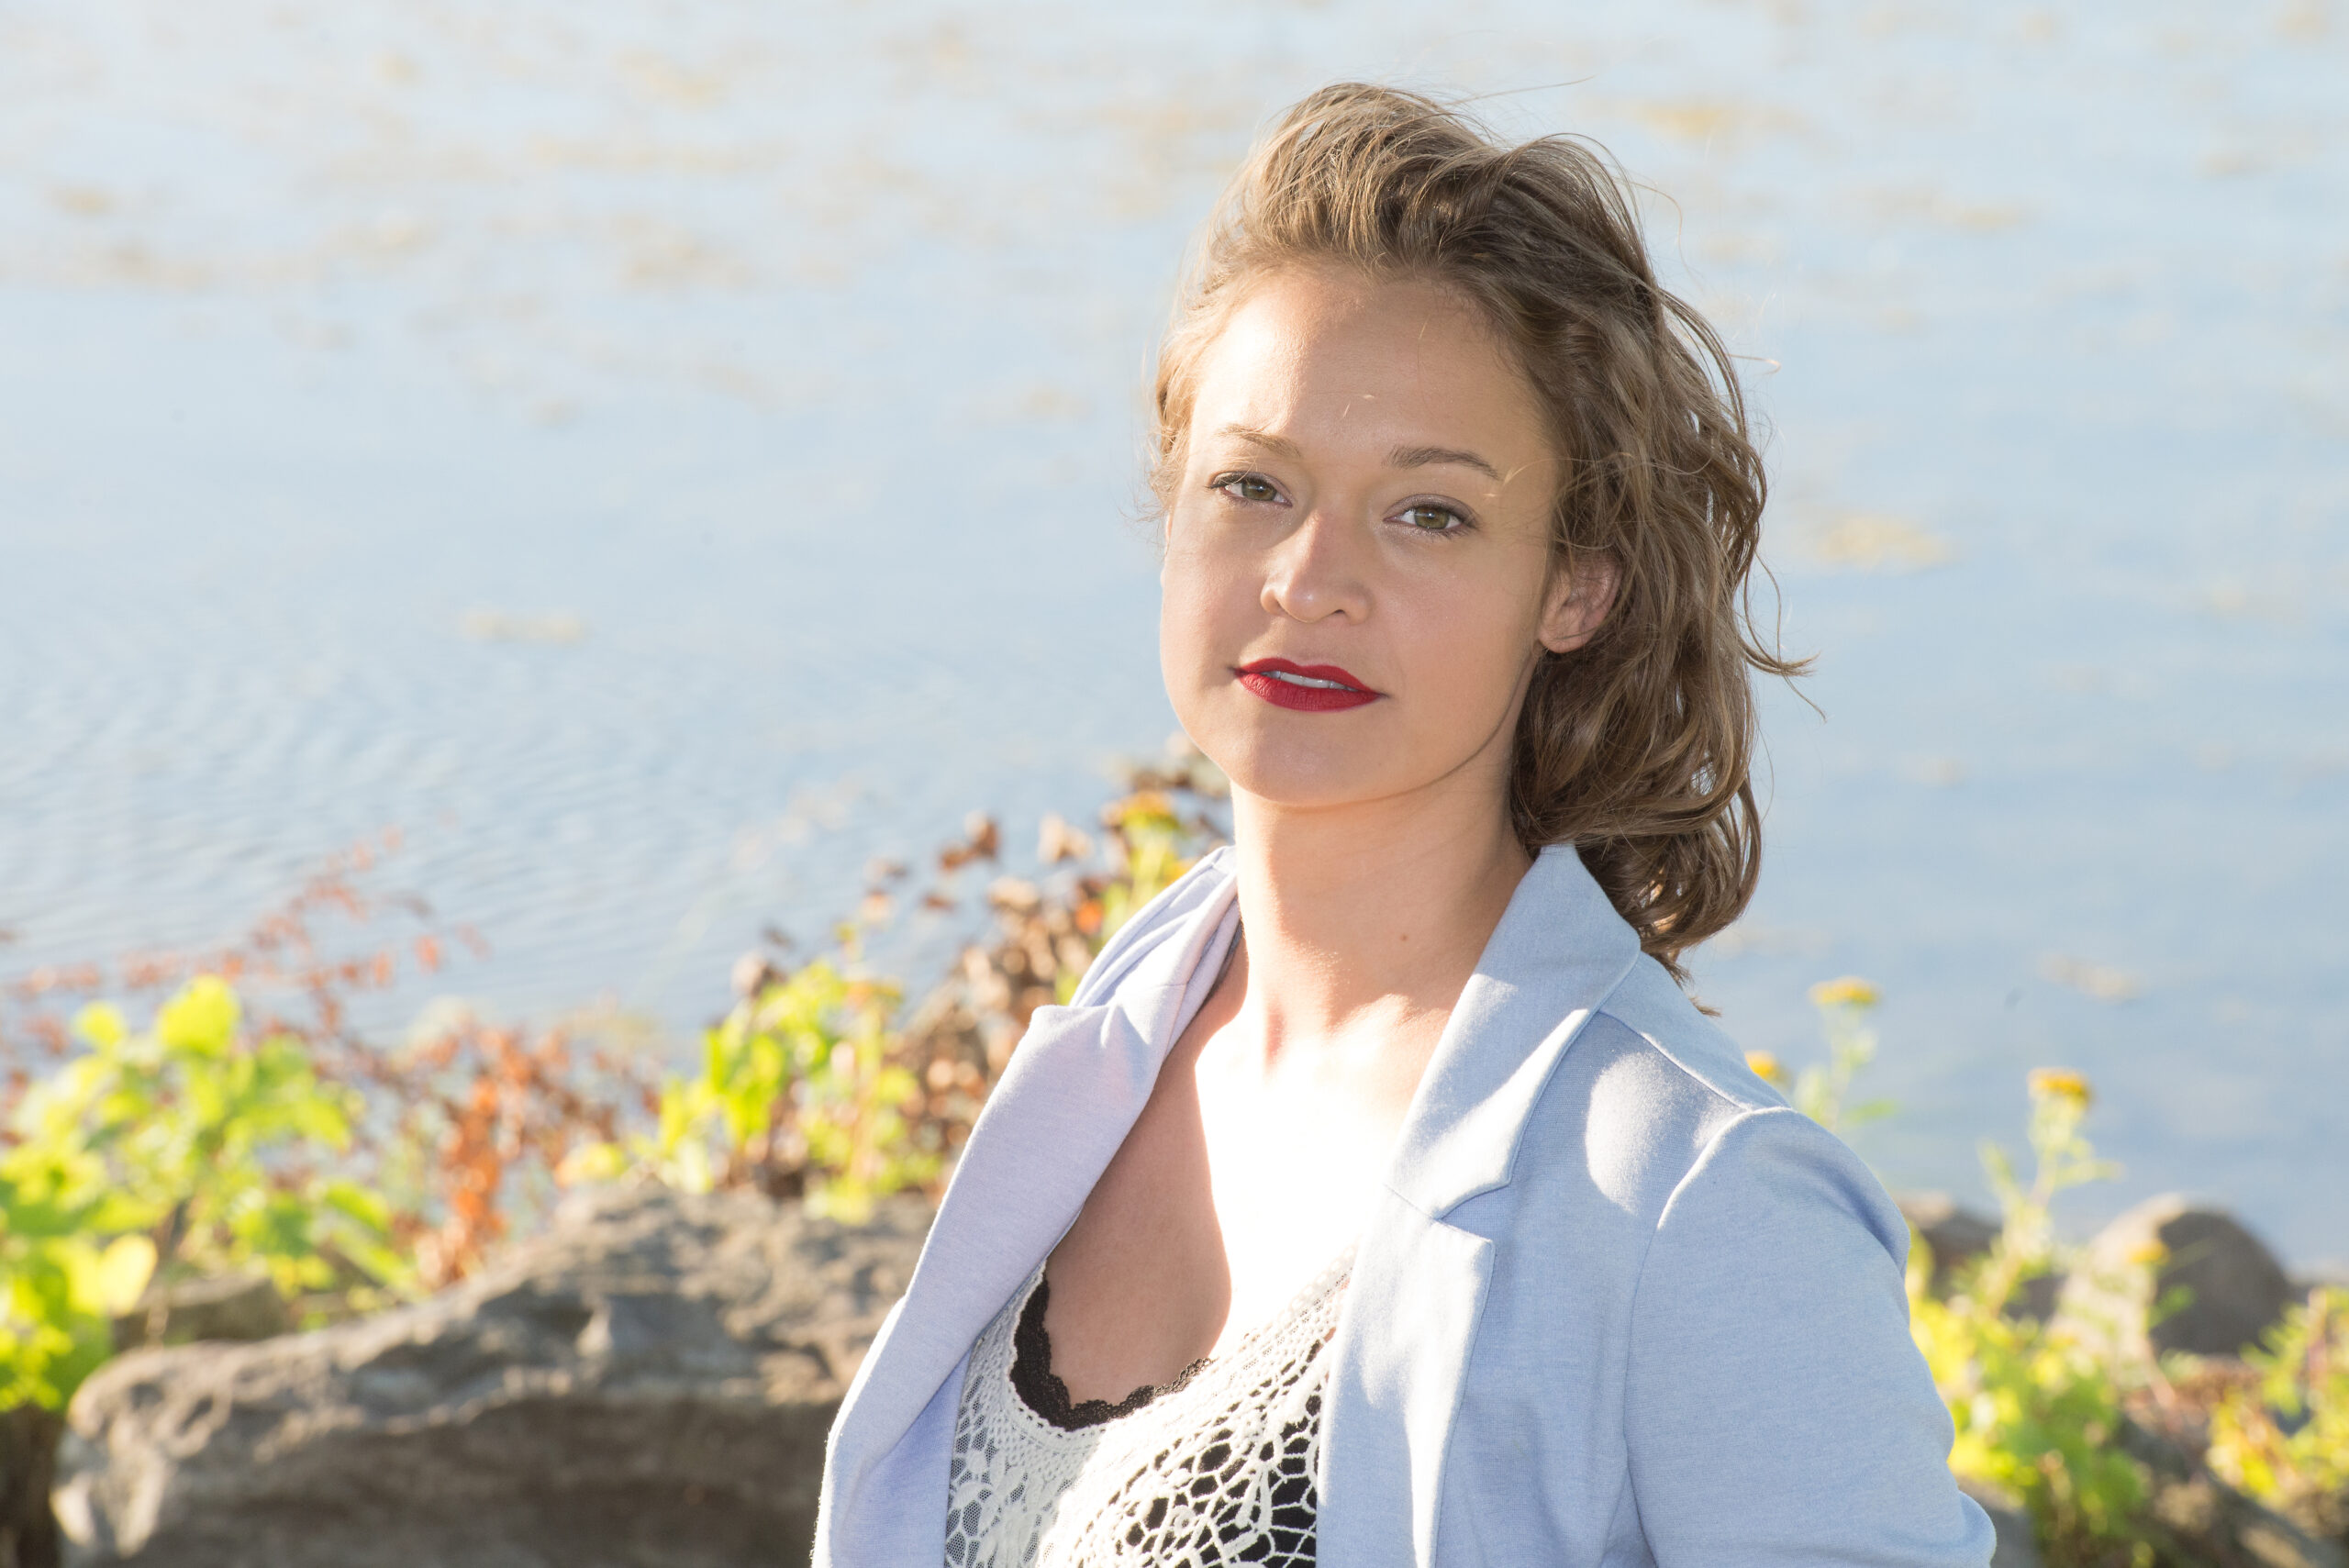 Composer Sophie Dupuis standing in front of a shoreline. There is water and some green foliage in the background. Sophie is has long blonde hair and is wearing a white suit jacket.